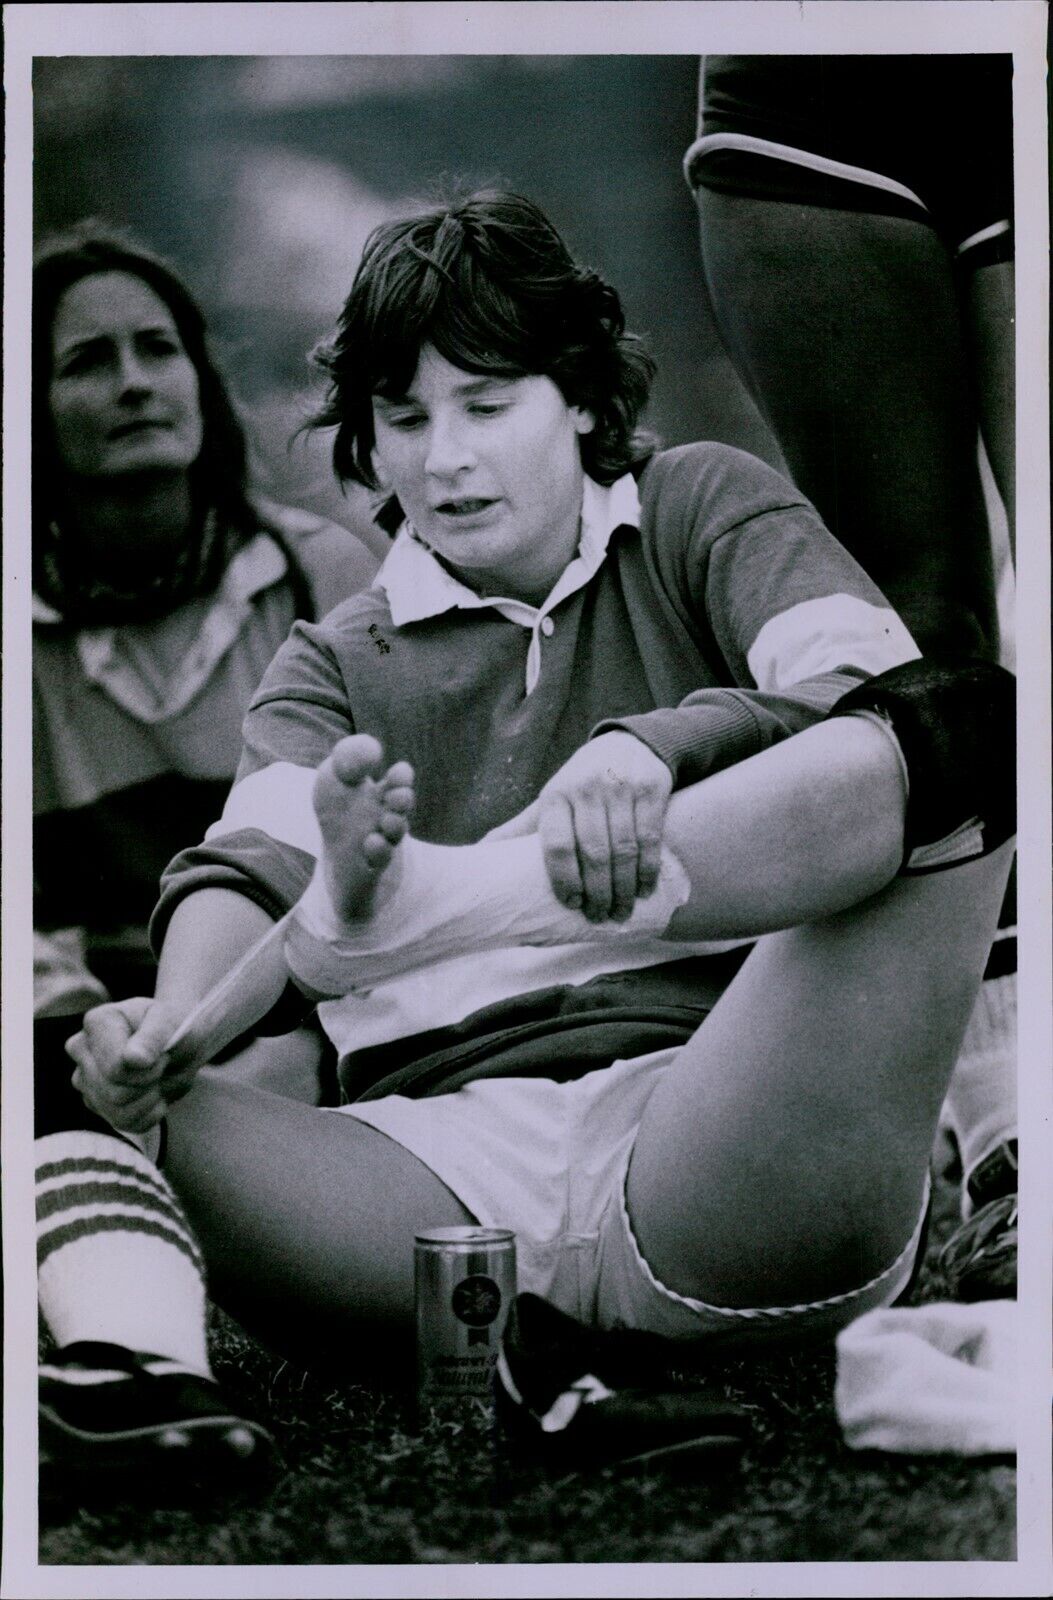 LG890 1978 Original Lyn Alweis Photo WOMAN RUGBY PLAYER WRAPPING FOOT Colorado